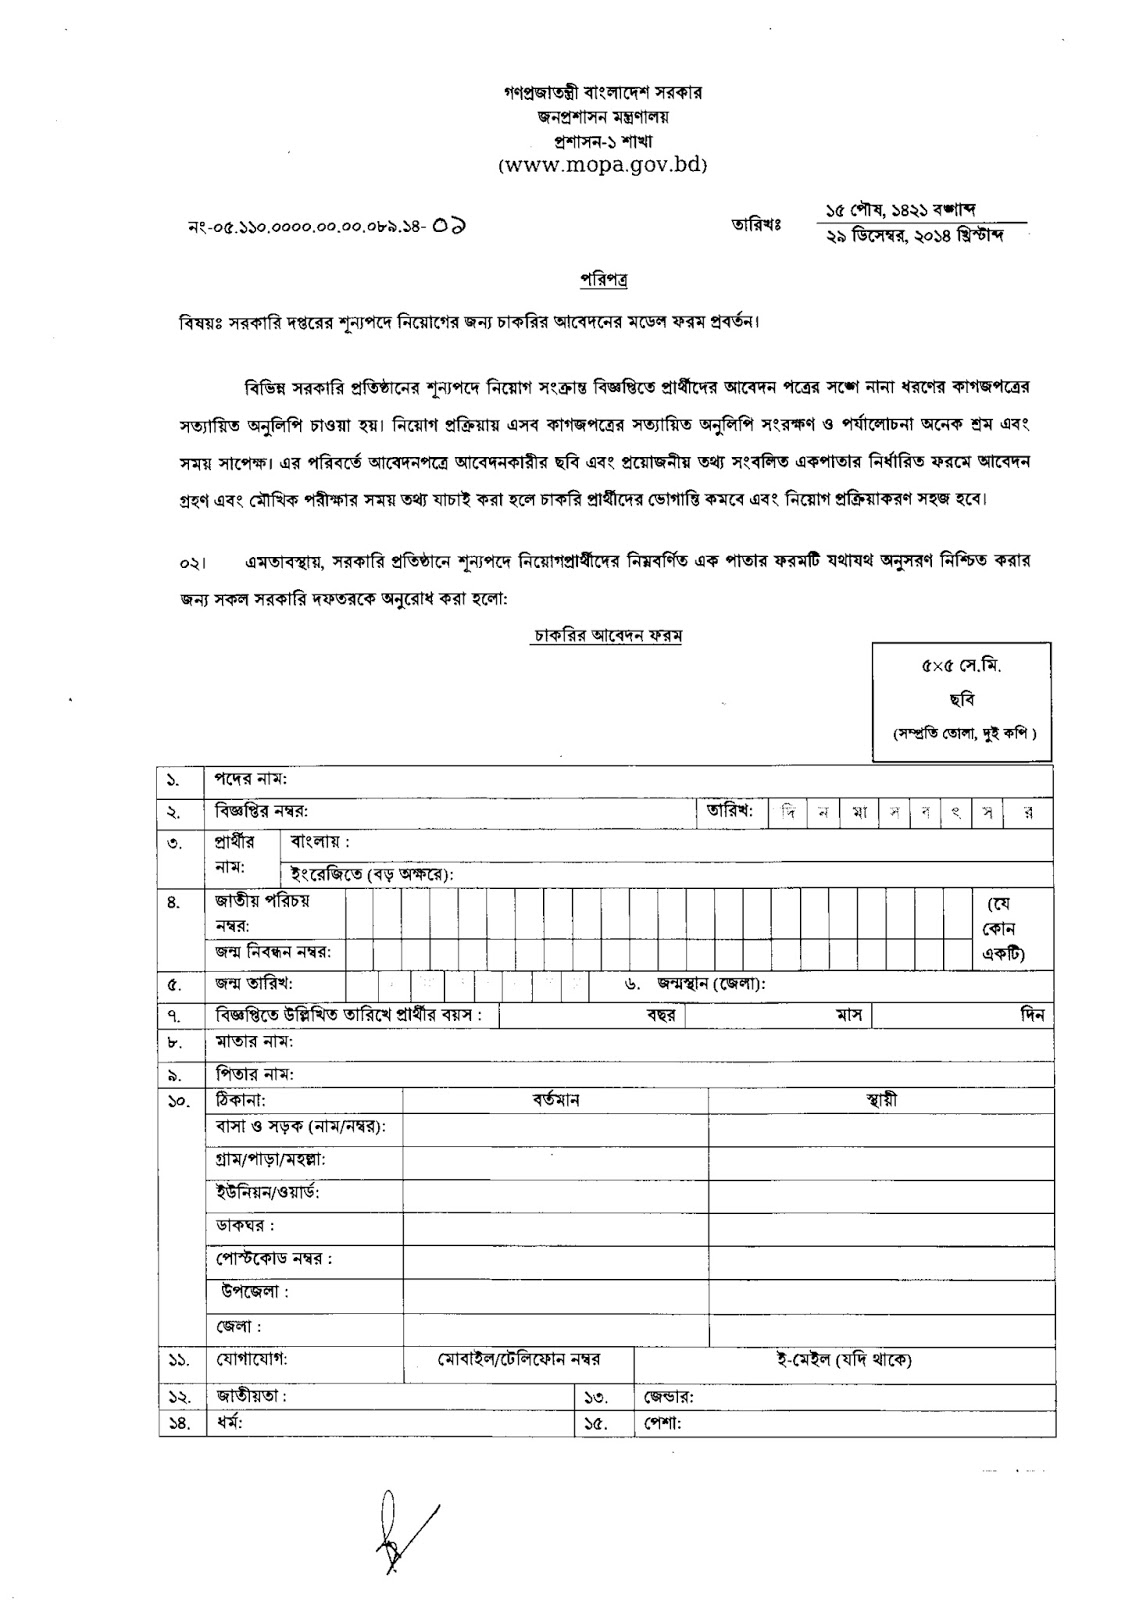 Additional District Judge's 2nd Court Office, Mymensingh Job Application Form